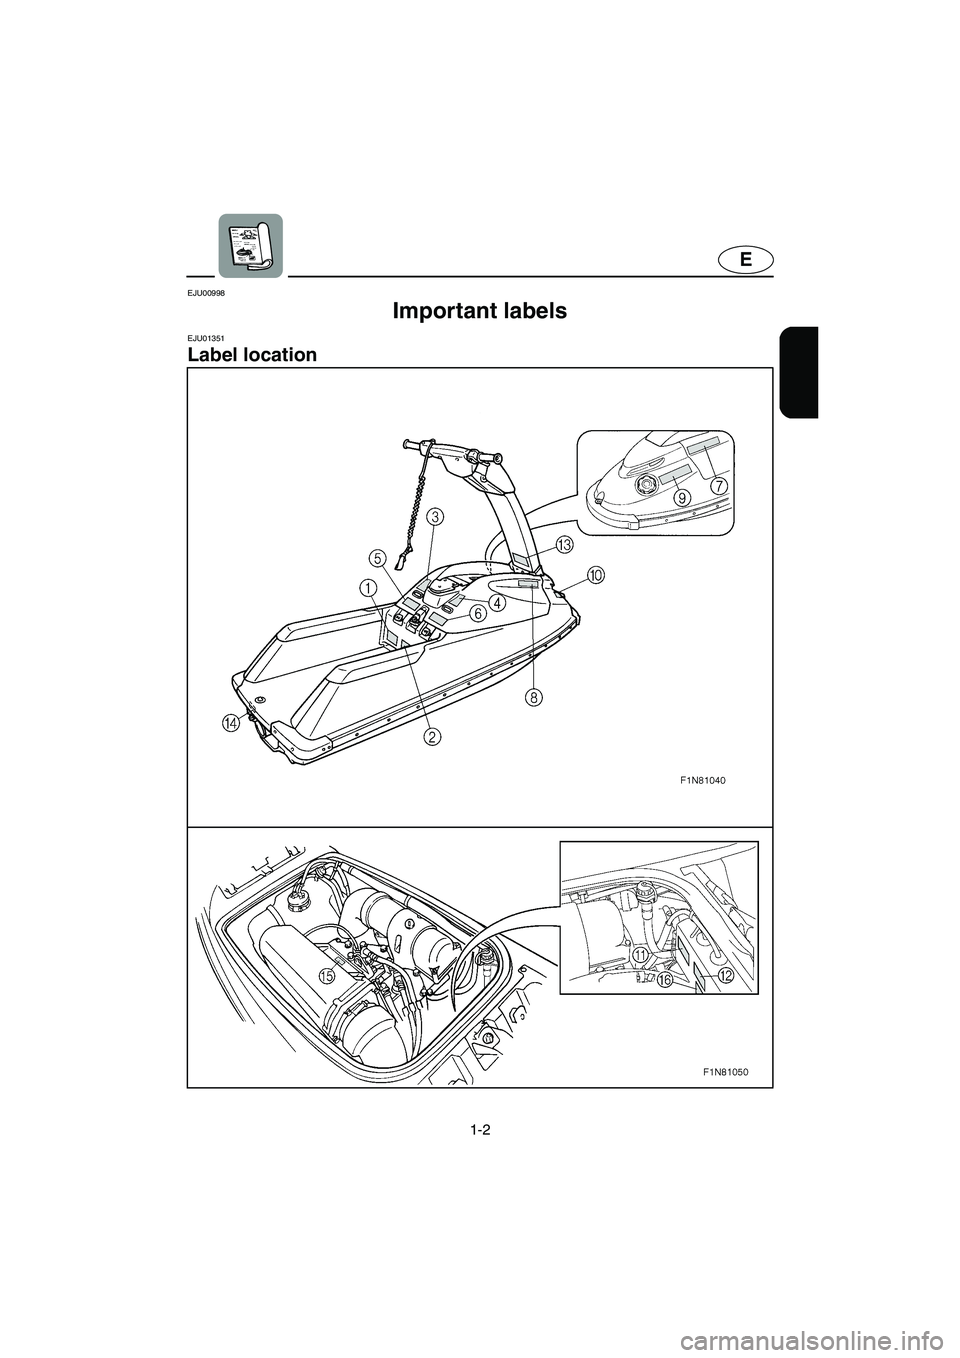 YAMAHA SUPERJET 2005  Owners Manual 1-2
E
EJU00998 
Important labels 
EJU01351 
Label location 
UF1N73.book  Page 2  Monday, May 10, 2004  10:37 AM 